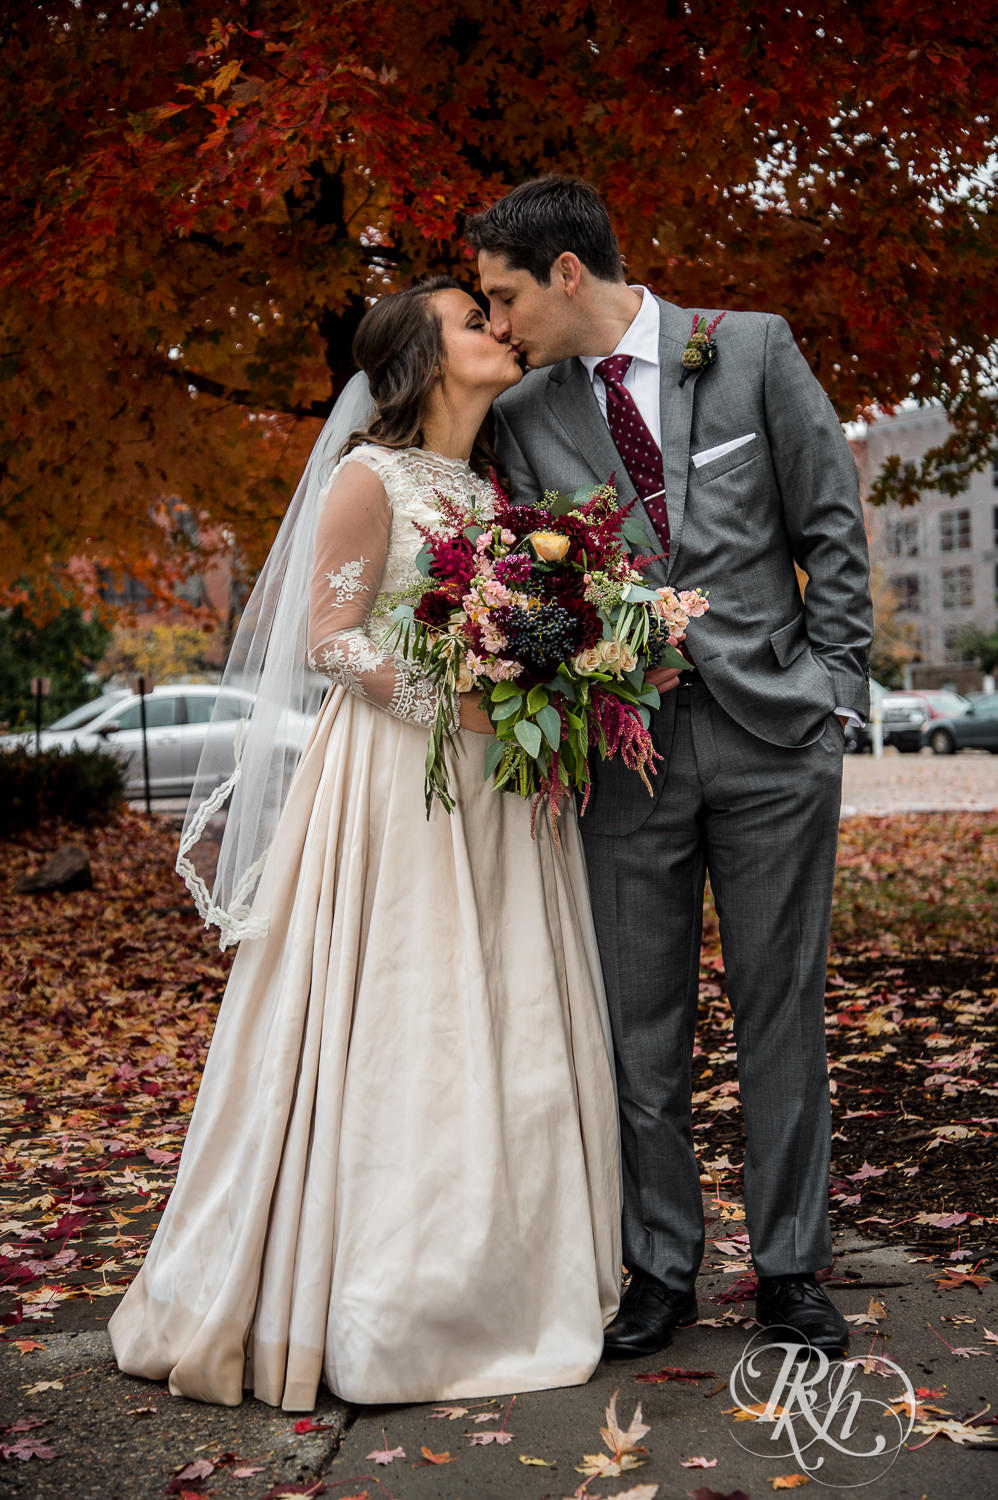 Bride and groom kiss in front of tree with red and orange leaves on a rainy wedding day in Minneapolis, Minnesota.